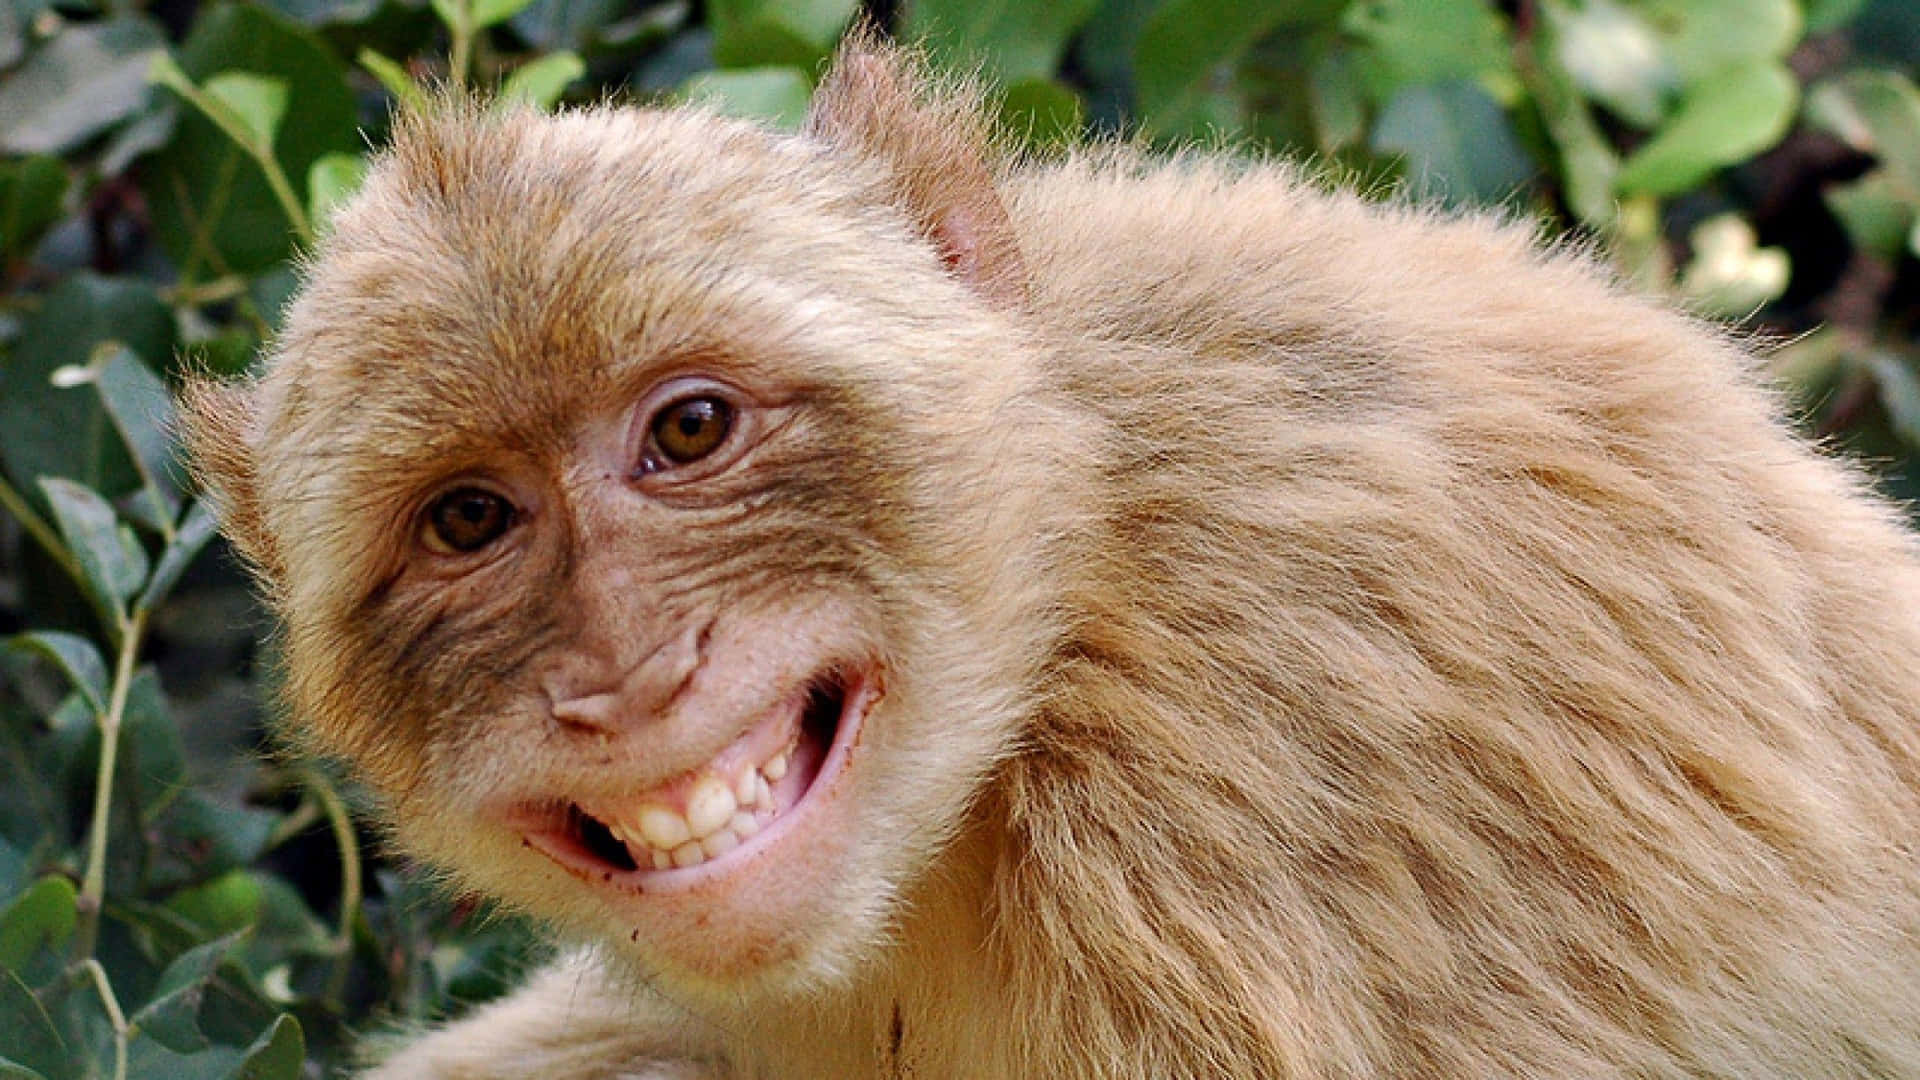 This funny monkey is ready for some summer fun!